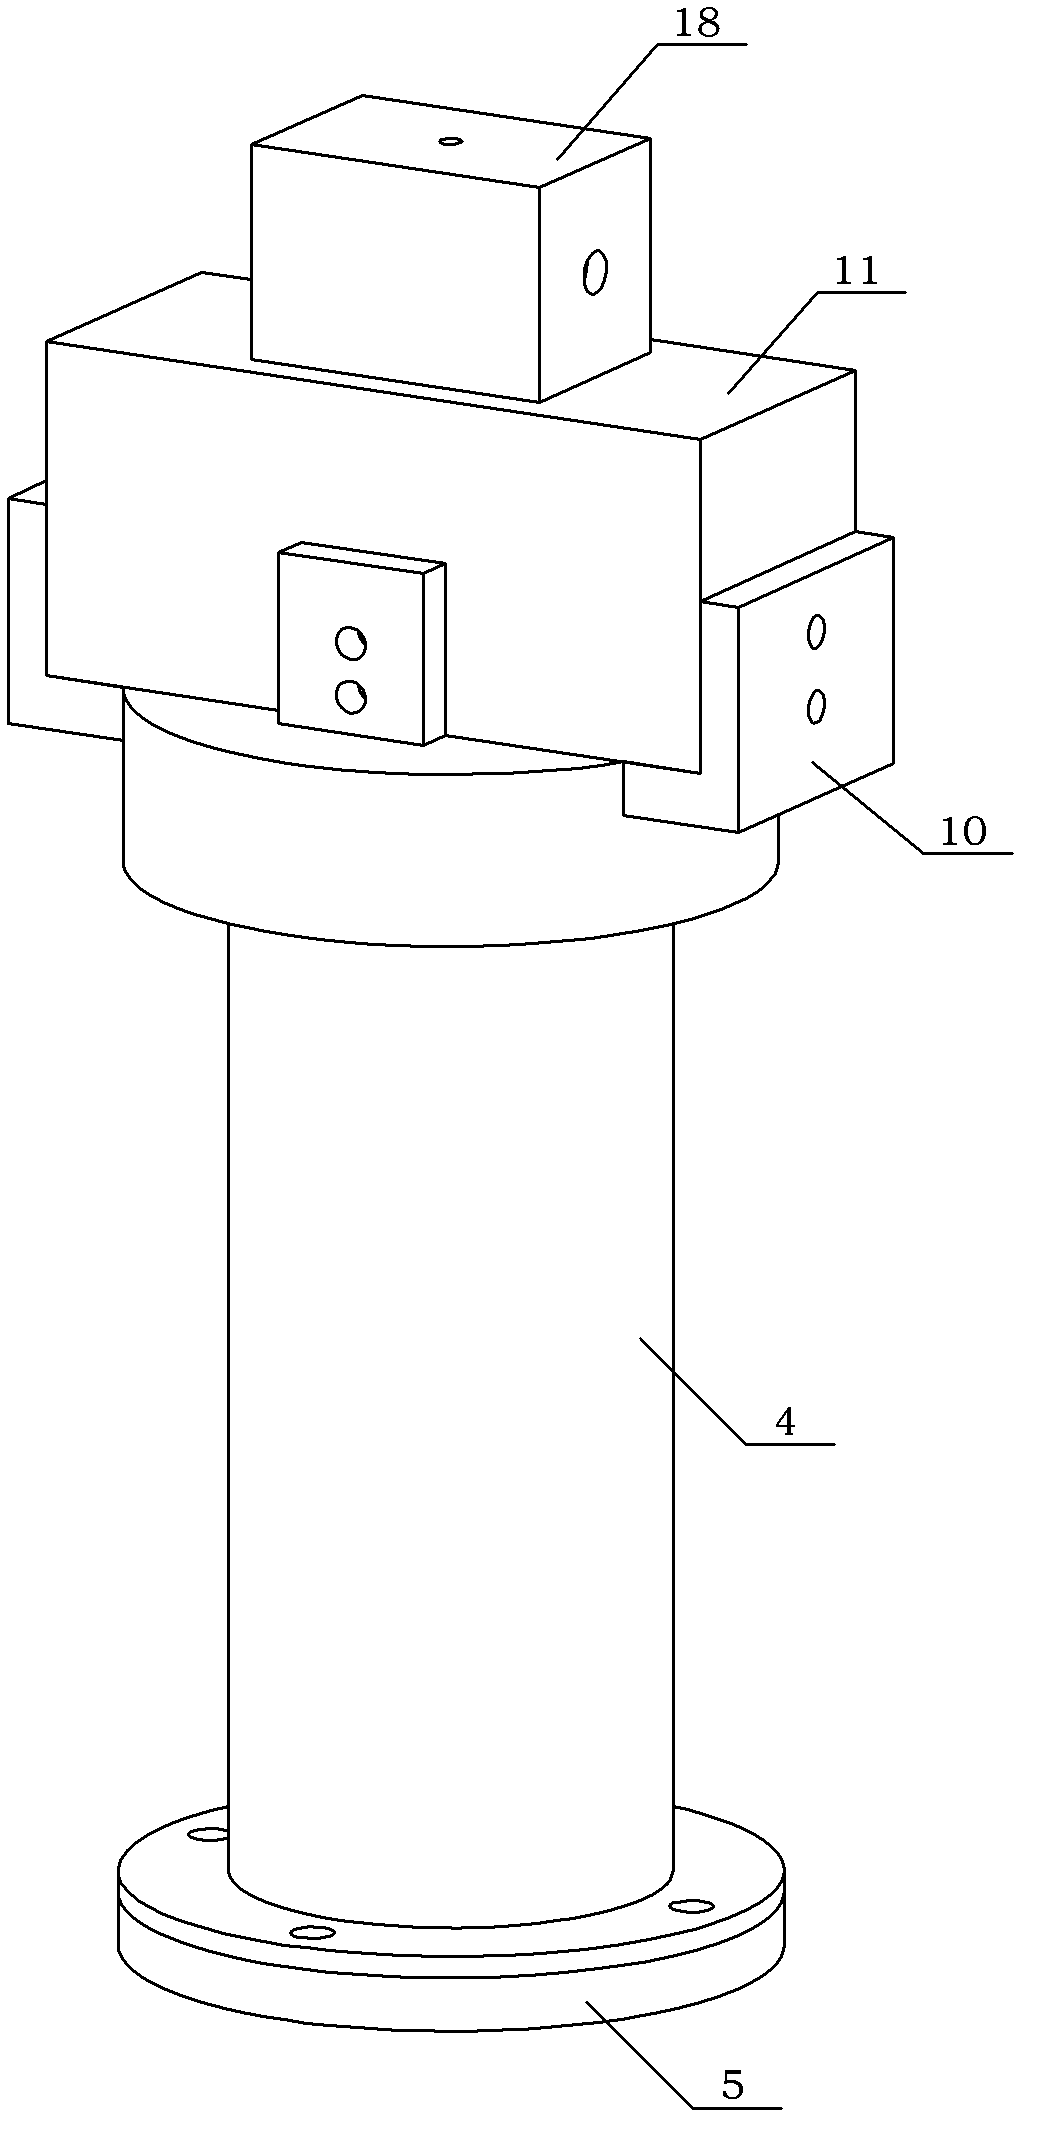 Switch valve driven by magnetostrictive actuator